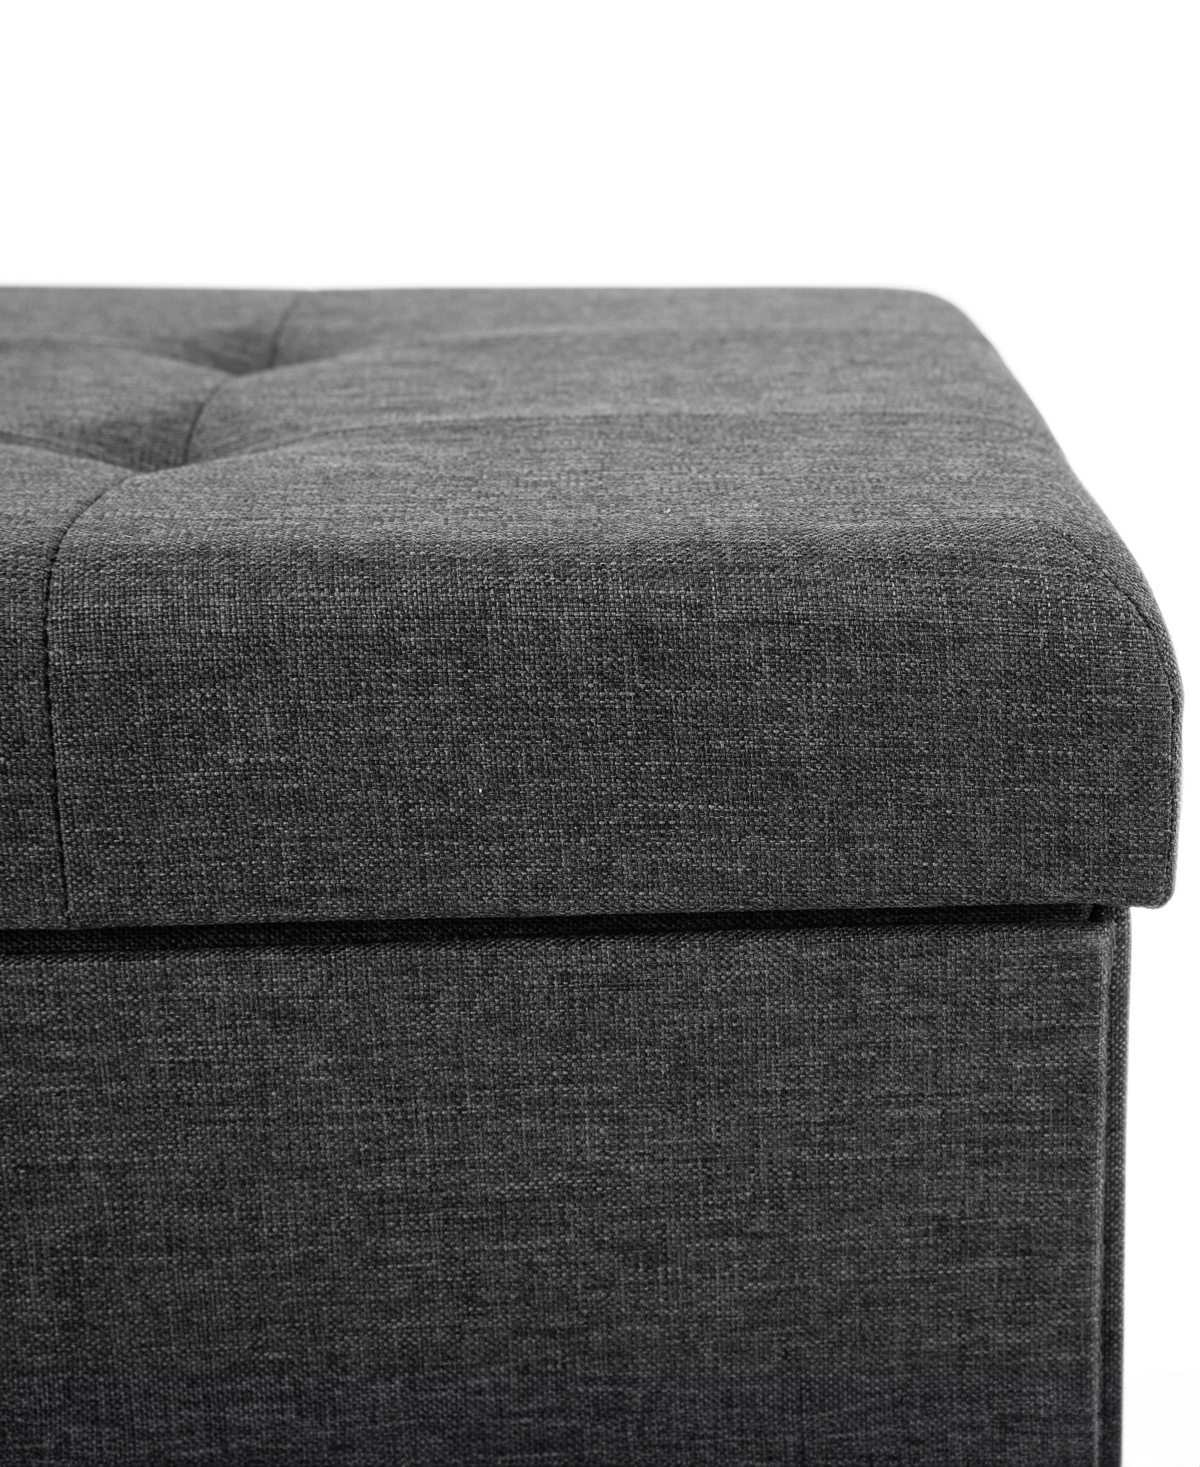 Shop Seville Classics Cushioned Ottoman Shoe Storage Bench In Modern Gray